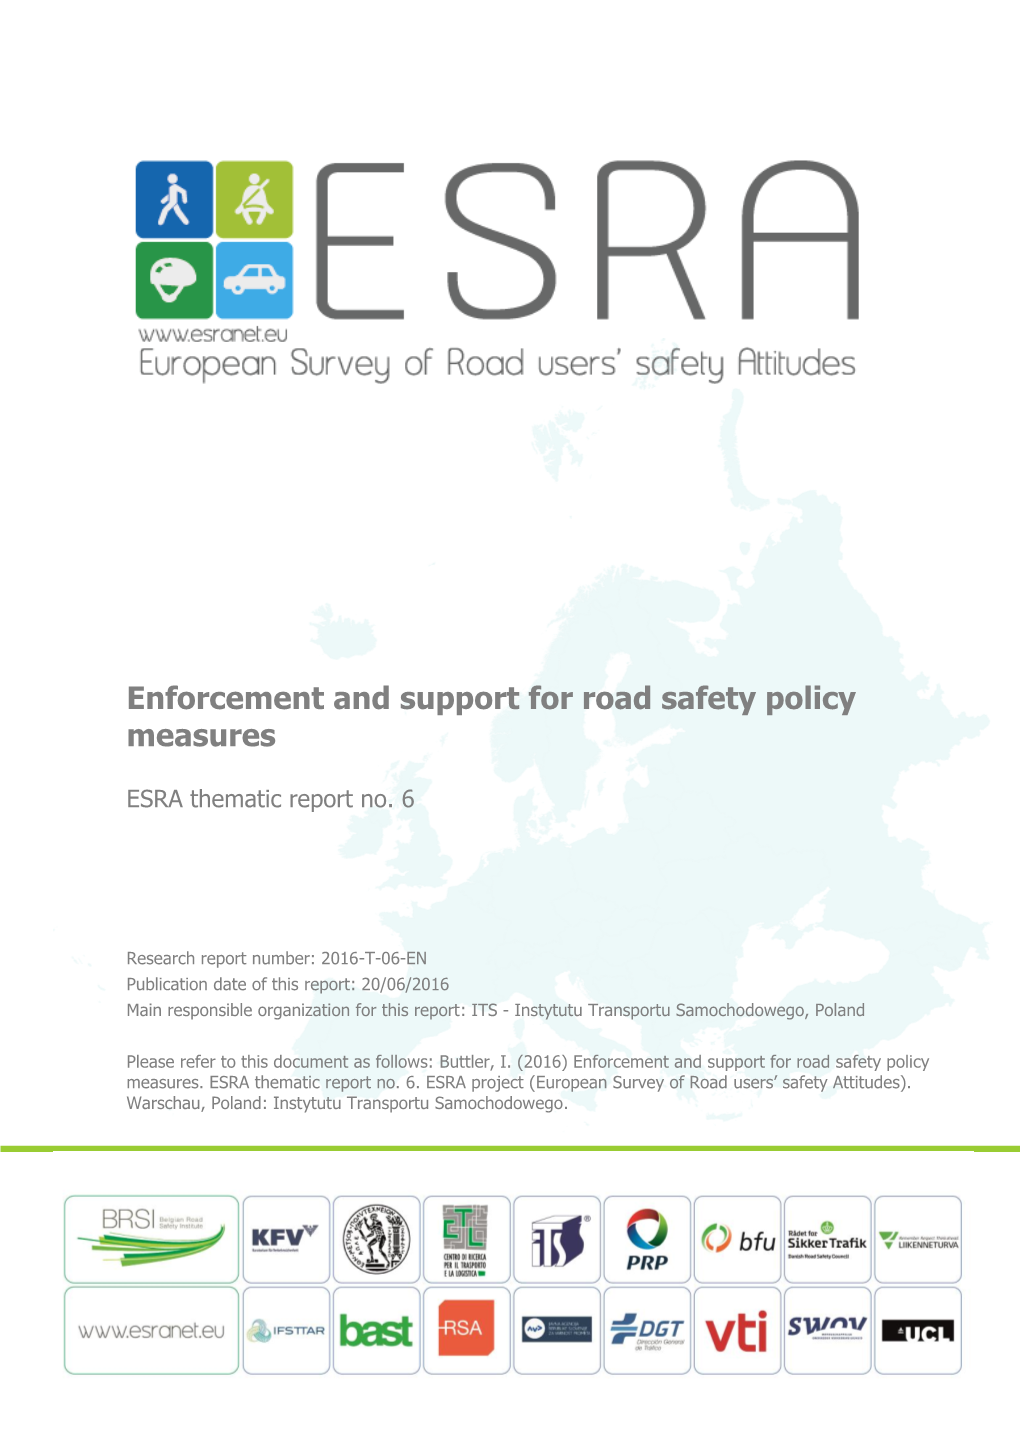 Enforcement and Support for Road Safety Policy Measures